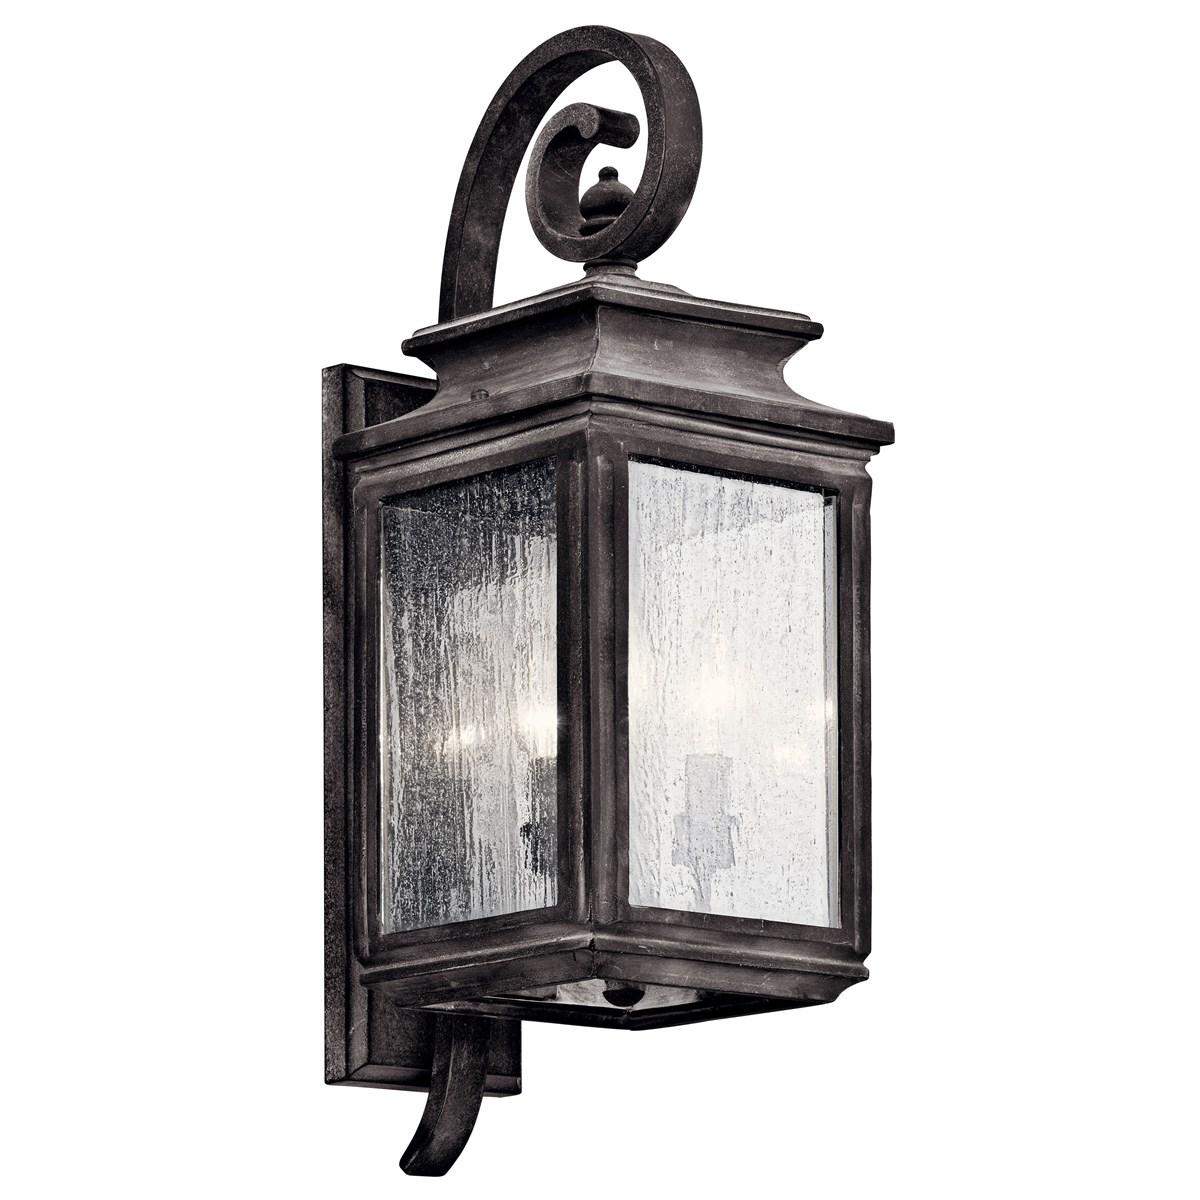 Wiscombe Park 22 in. Outdoor Wall Light